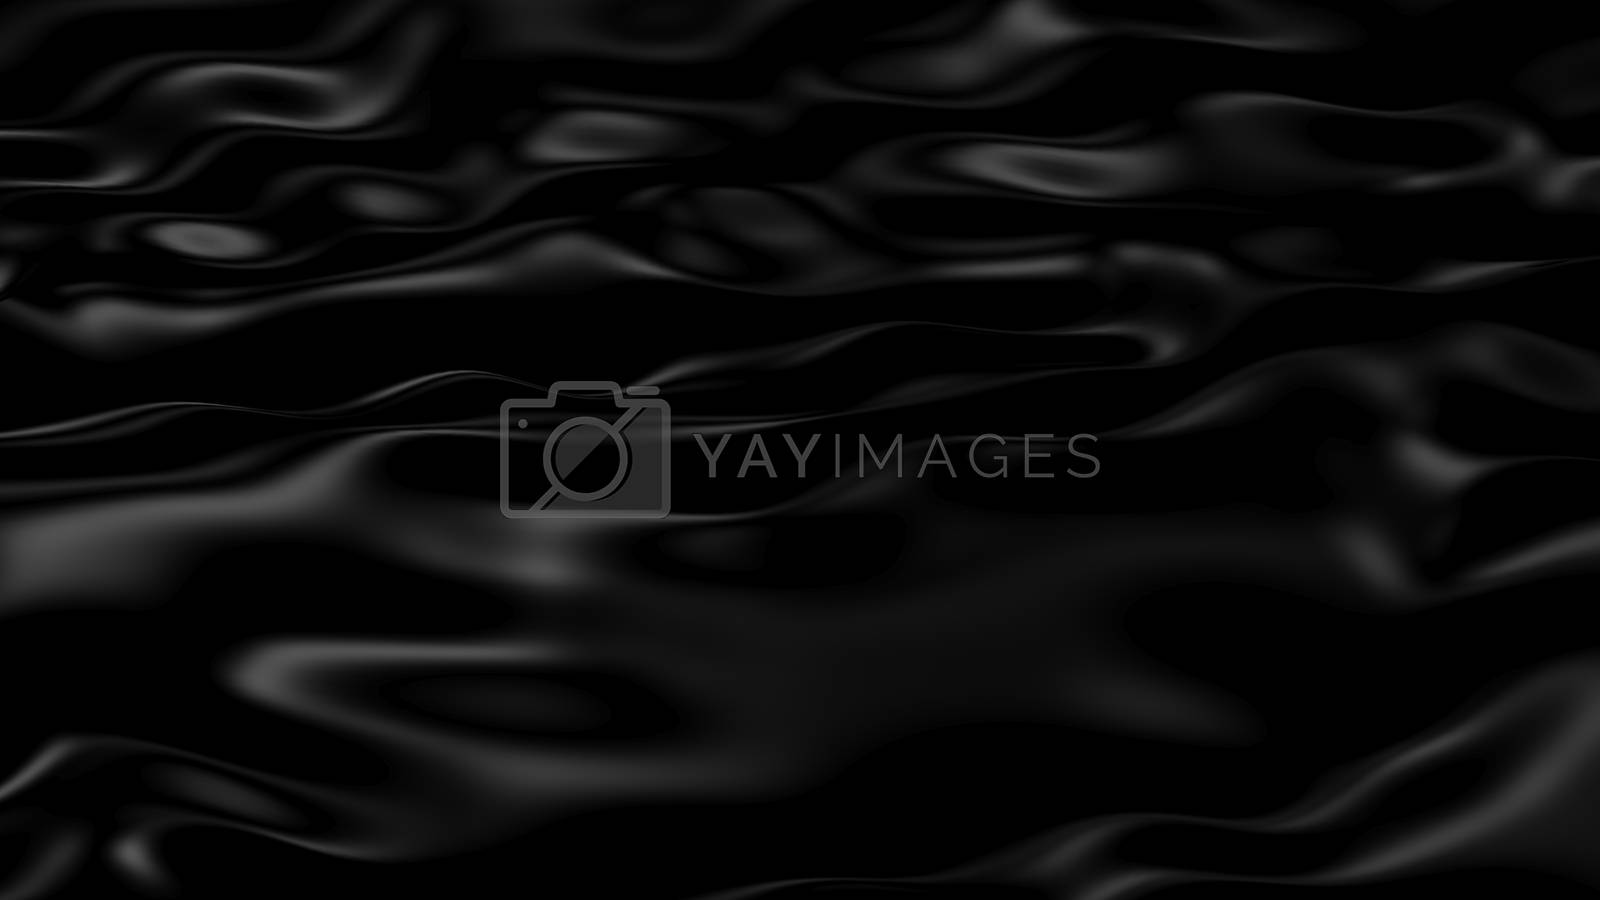 Royalty free image of 3D Illustration Abstract Black Background by brux